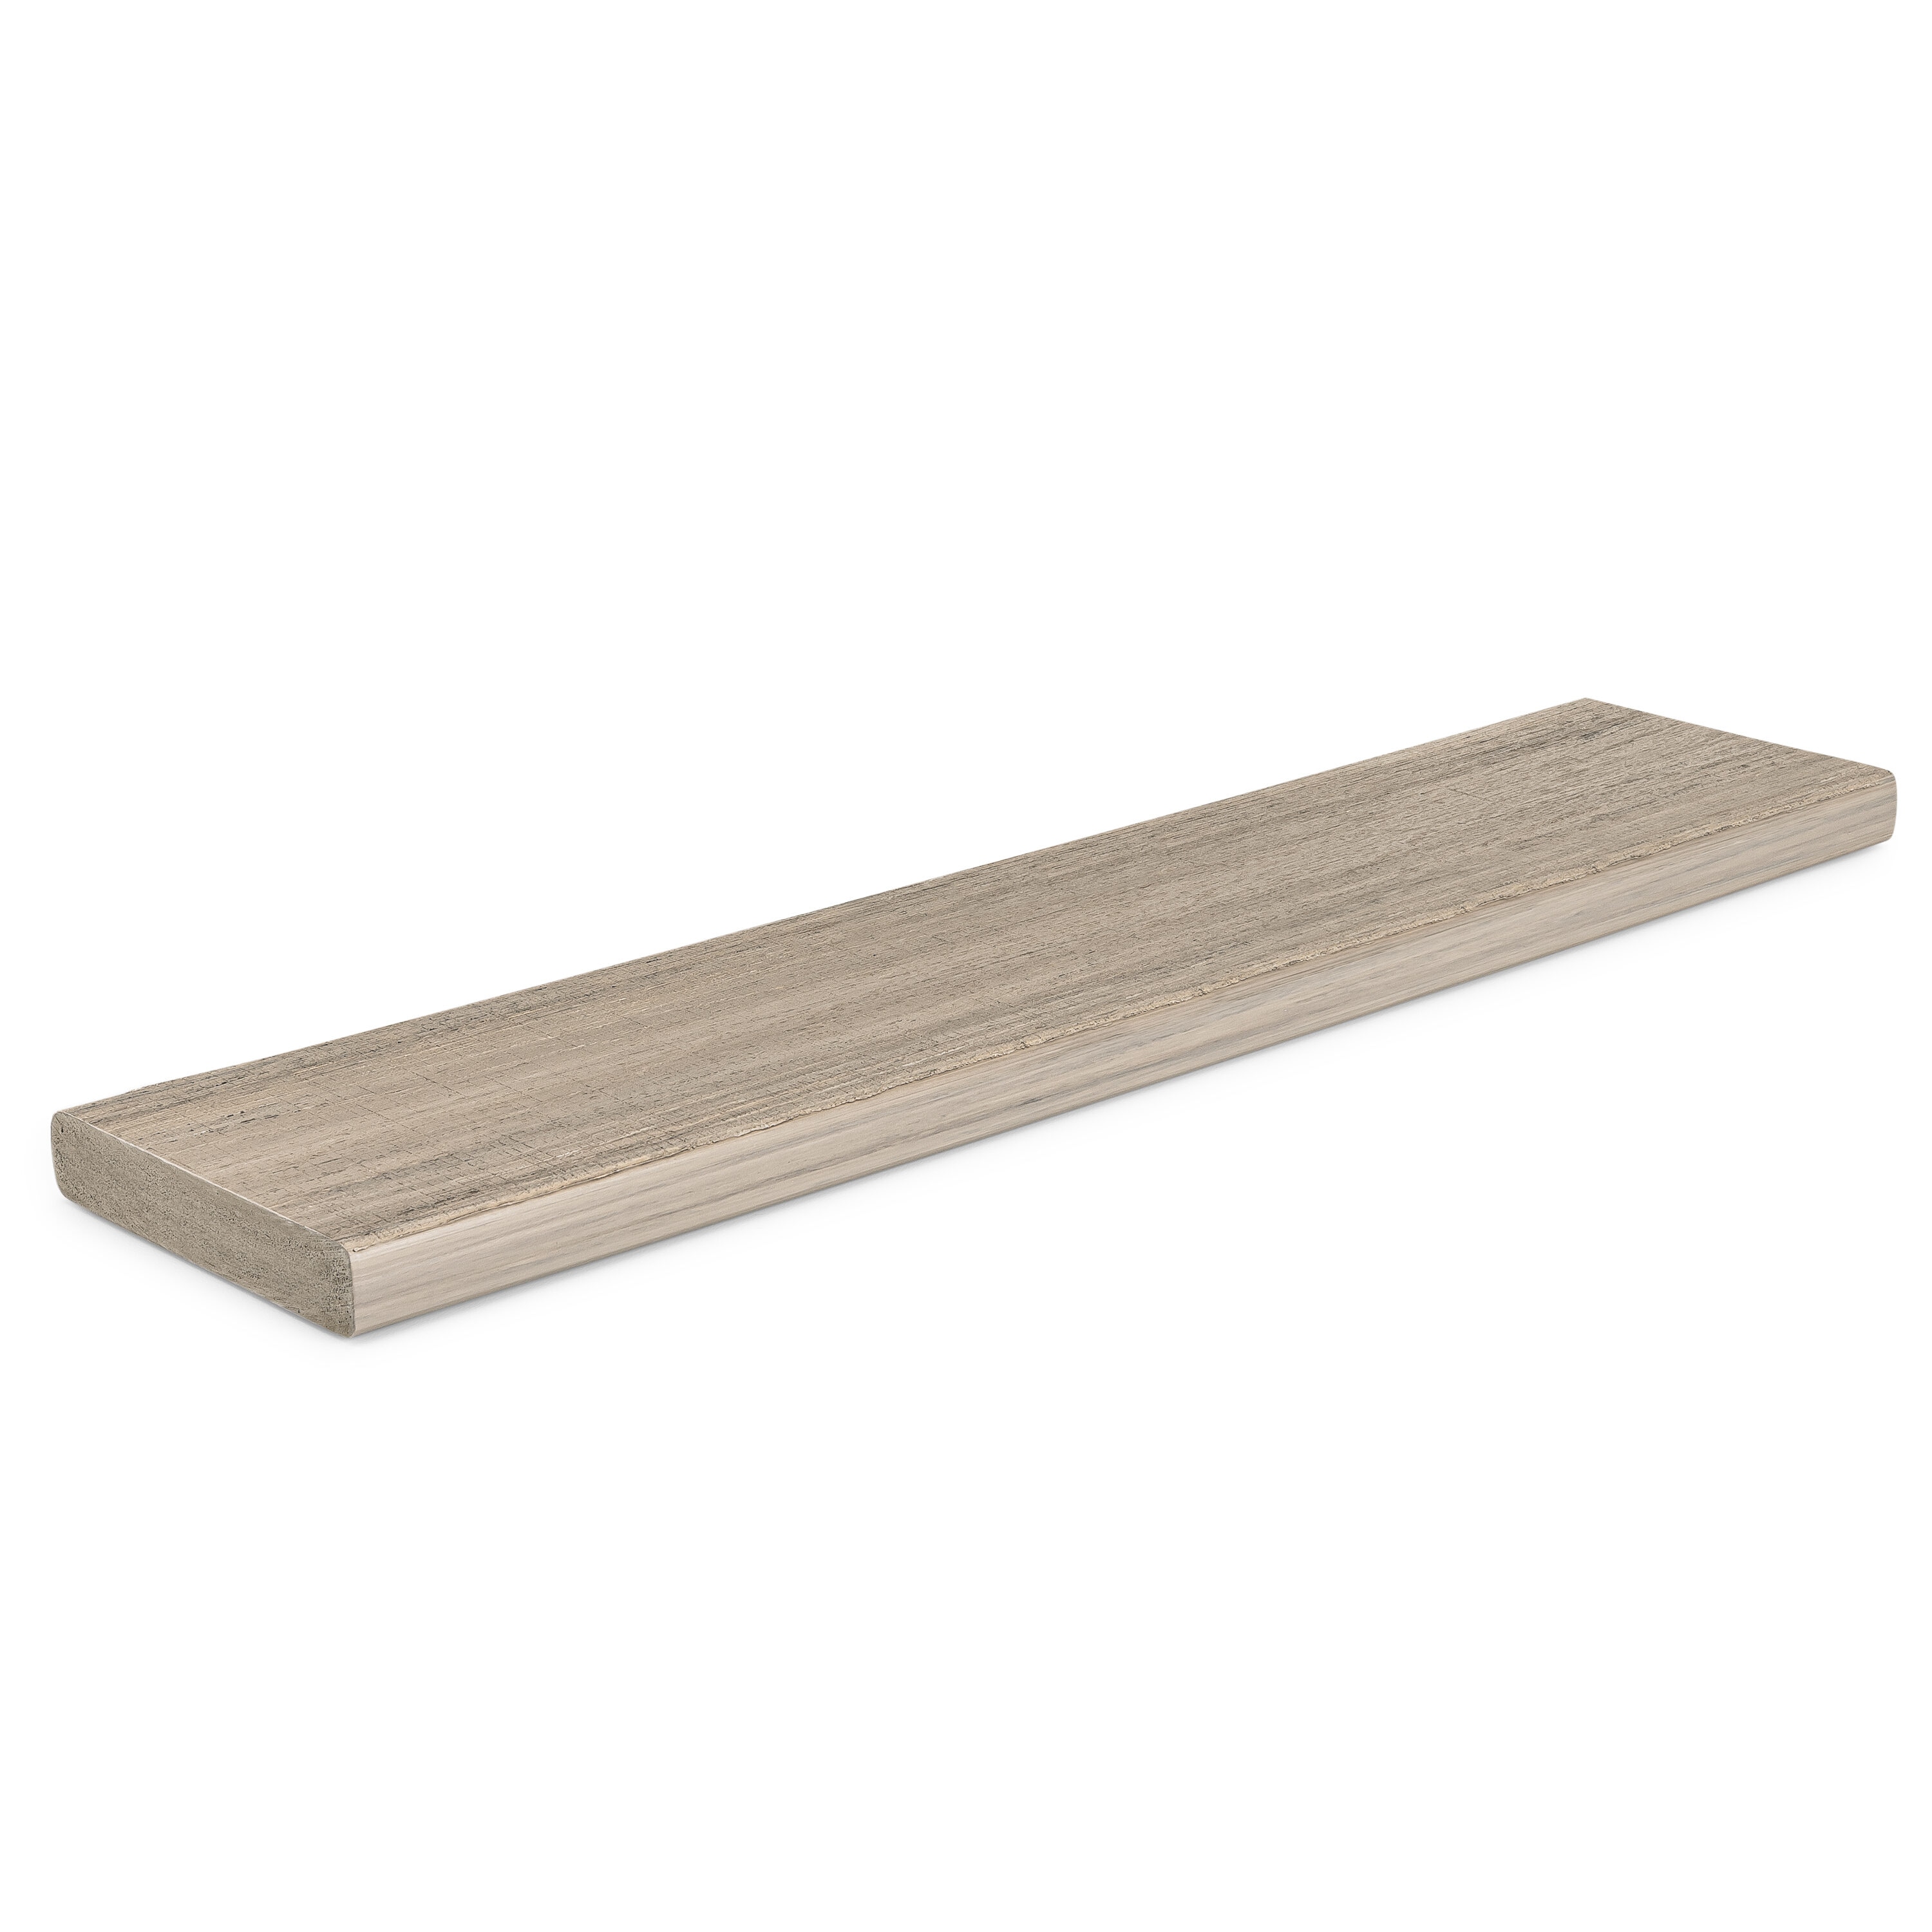 Landmark 5/4-in x 6-in x 16-ft French White Oak Square Composite Deck Board in Brown/Tan | - TimberTech ADB15516FW